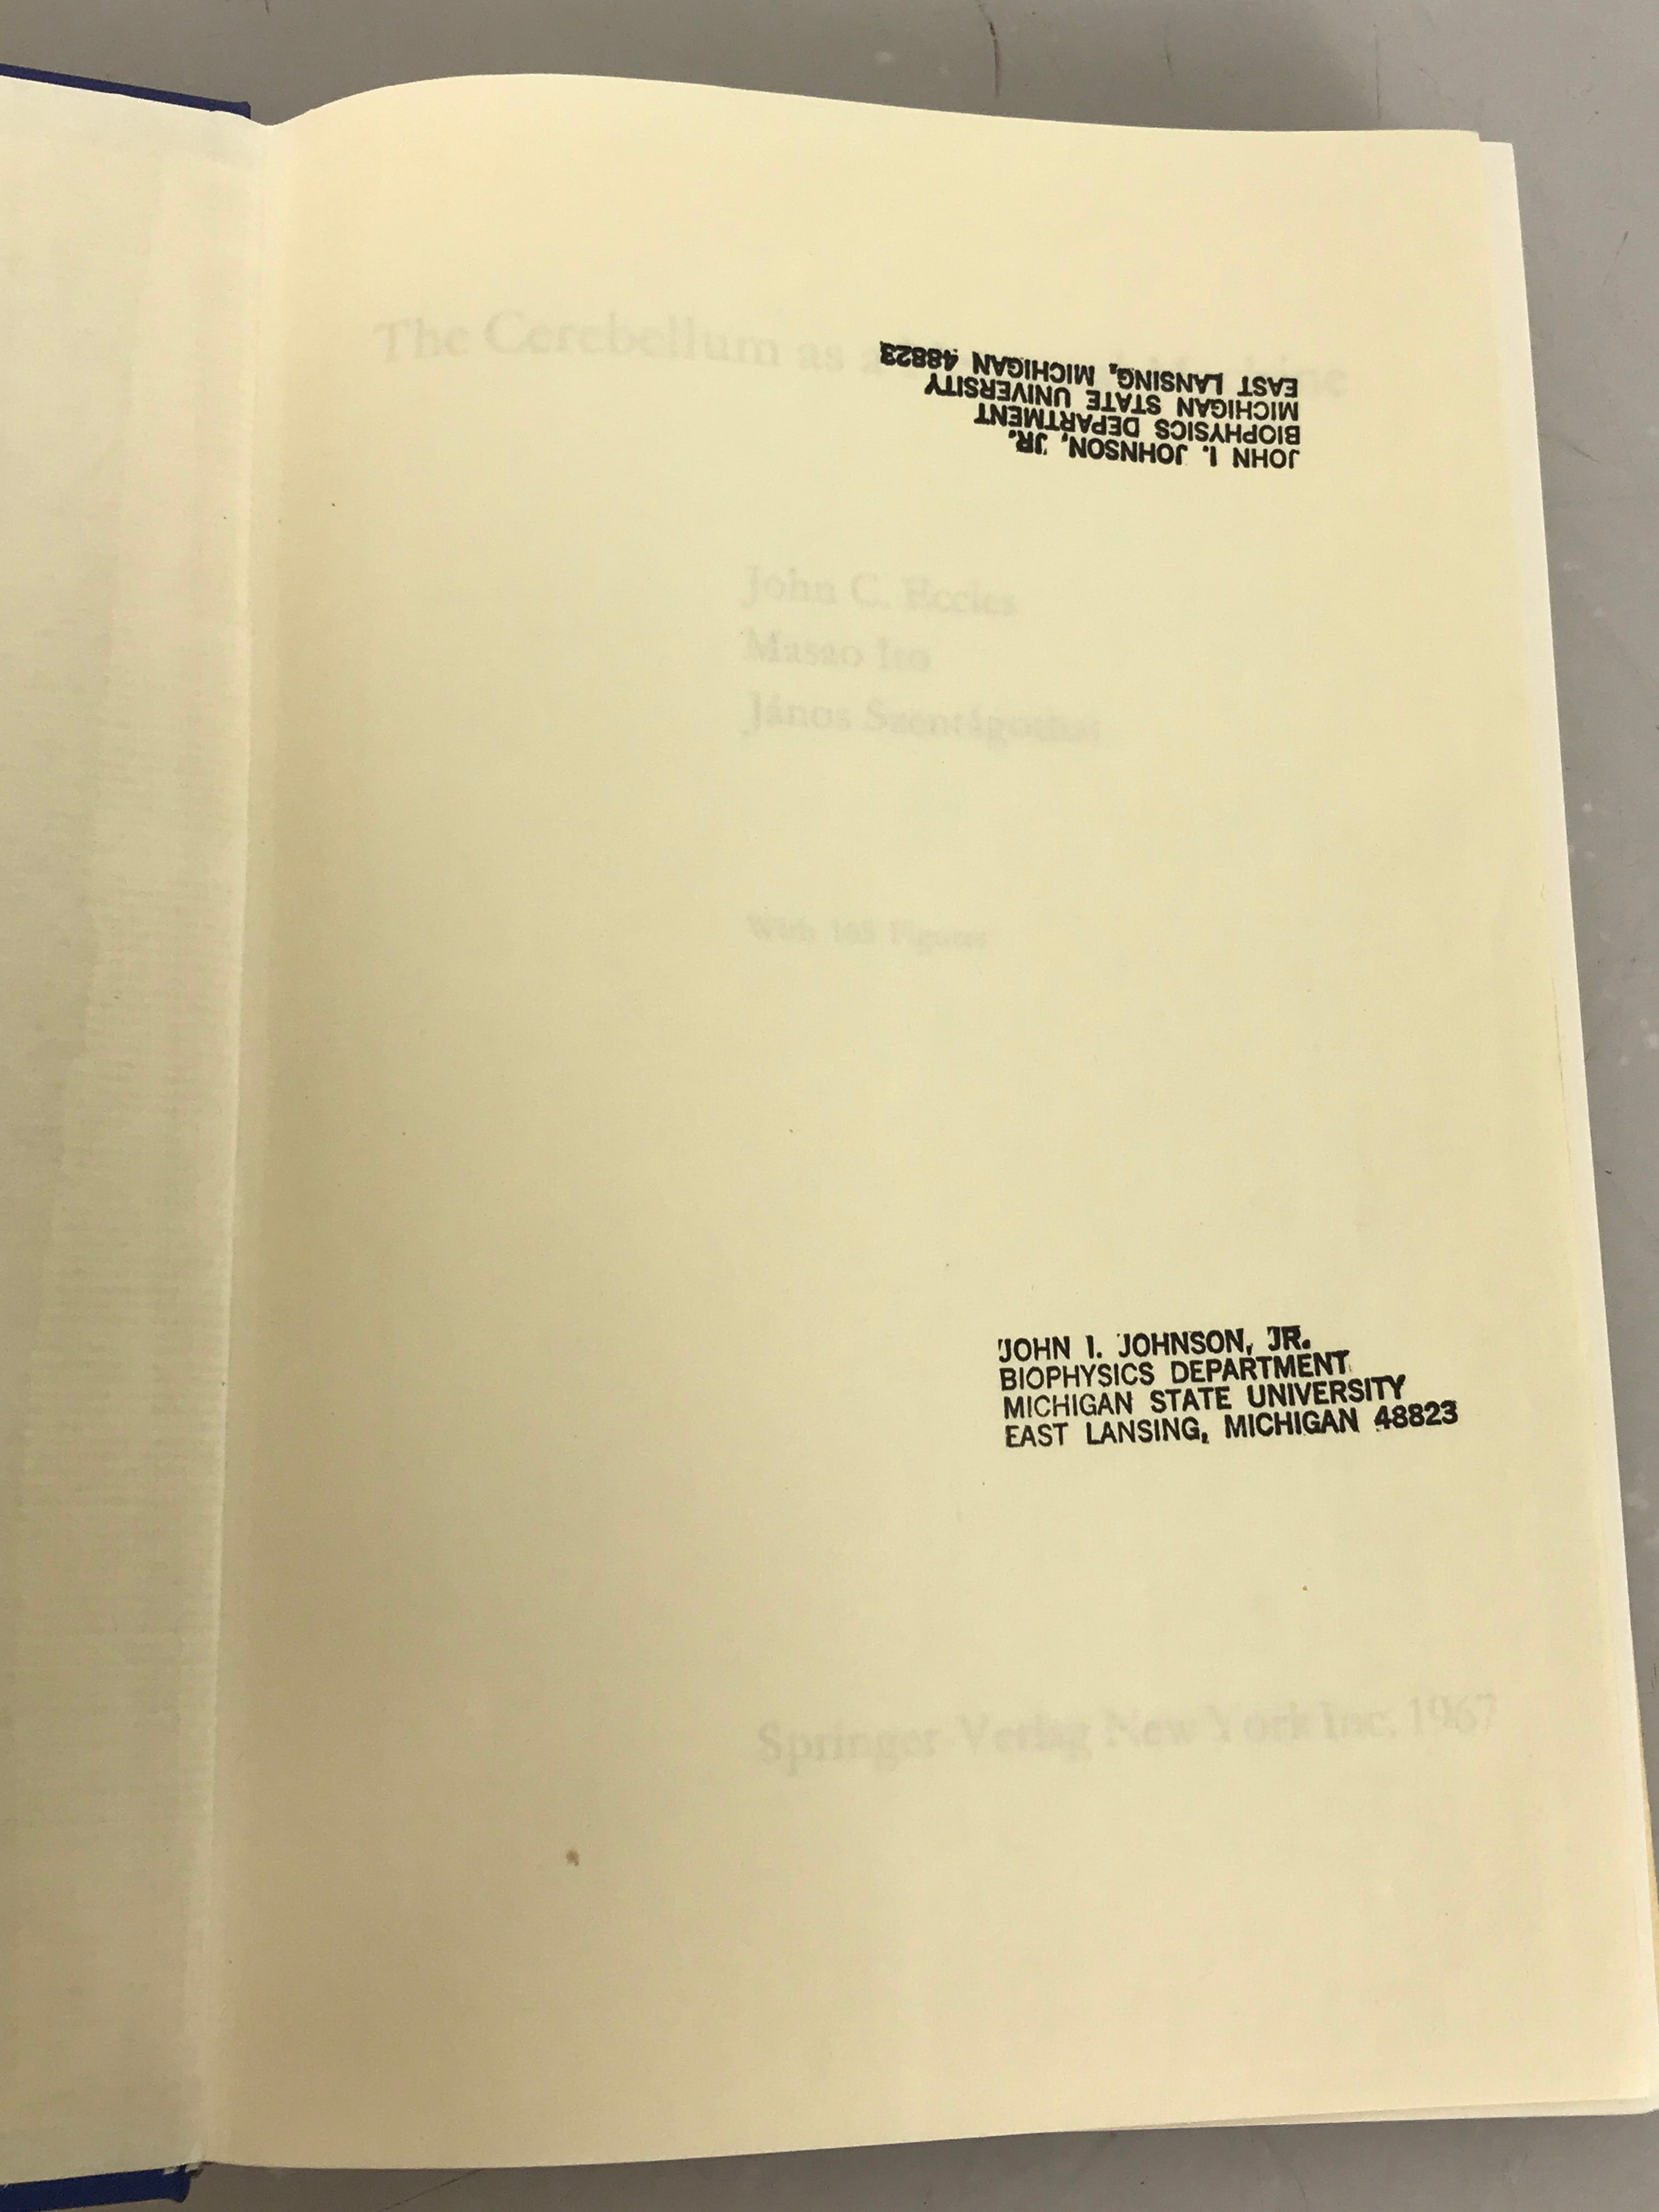 Lot of 2 Nobel Winner John C. Eccles Science Books: The Physiology of Nerve Cells (1960, signed) and The Cerebellum as a Neuronal Machine (1967, with Ito and Szentagothai) HC DJ